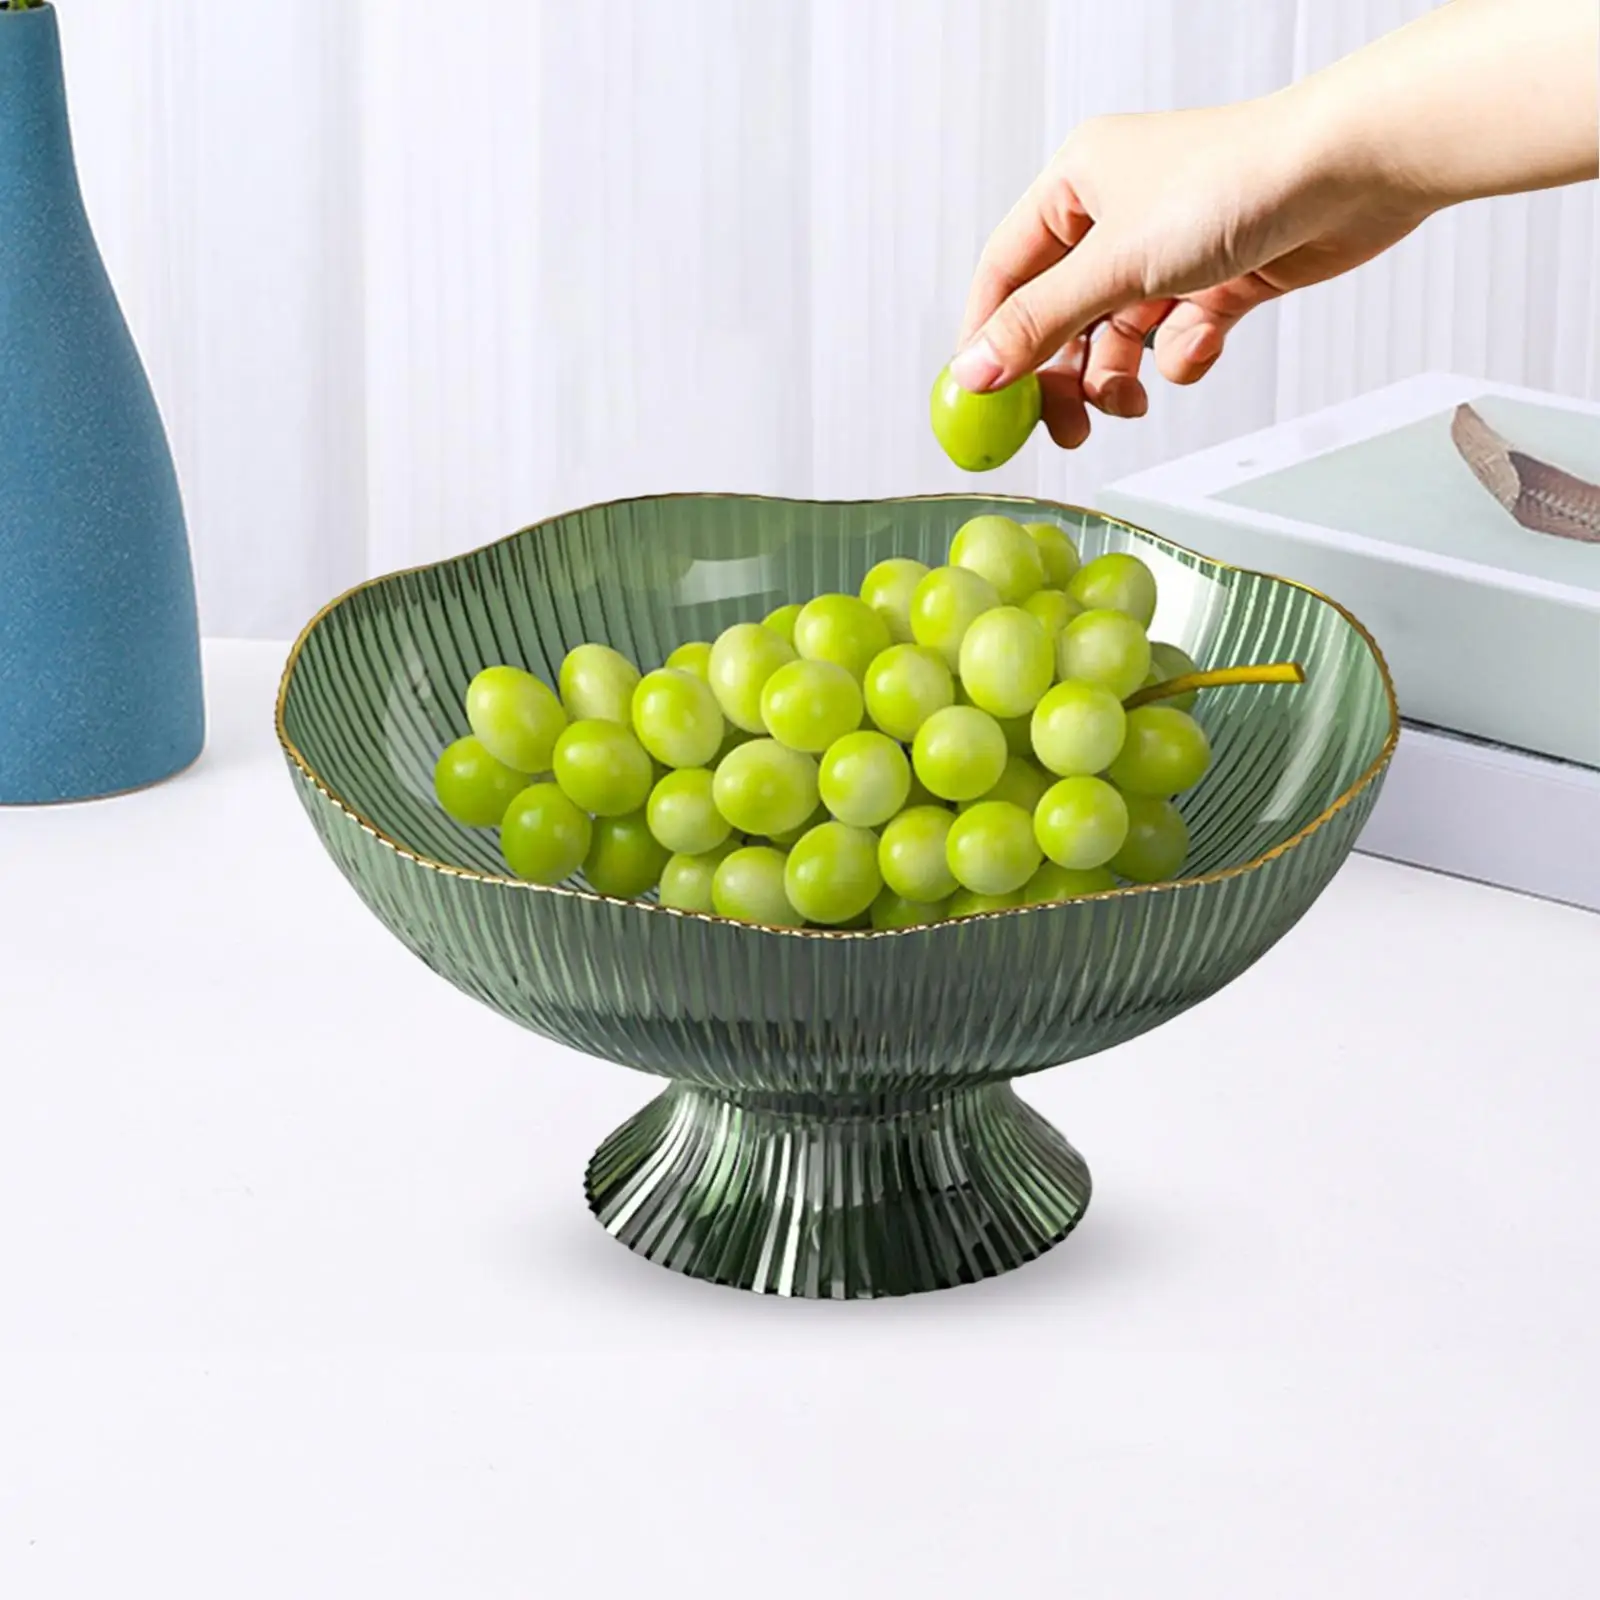 Fruit Bowl Dessert Display Stand with Draining Holes Dish Holder Snacks Fruit Basket Bowl for Kitchen Countertop Home Ornaments